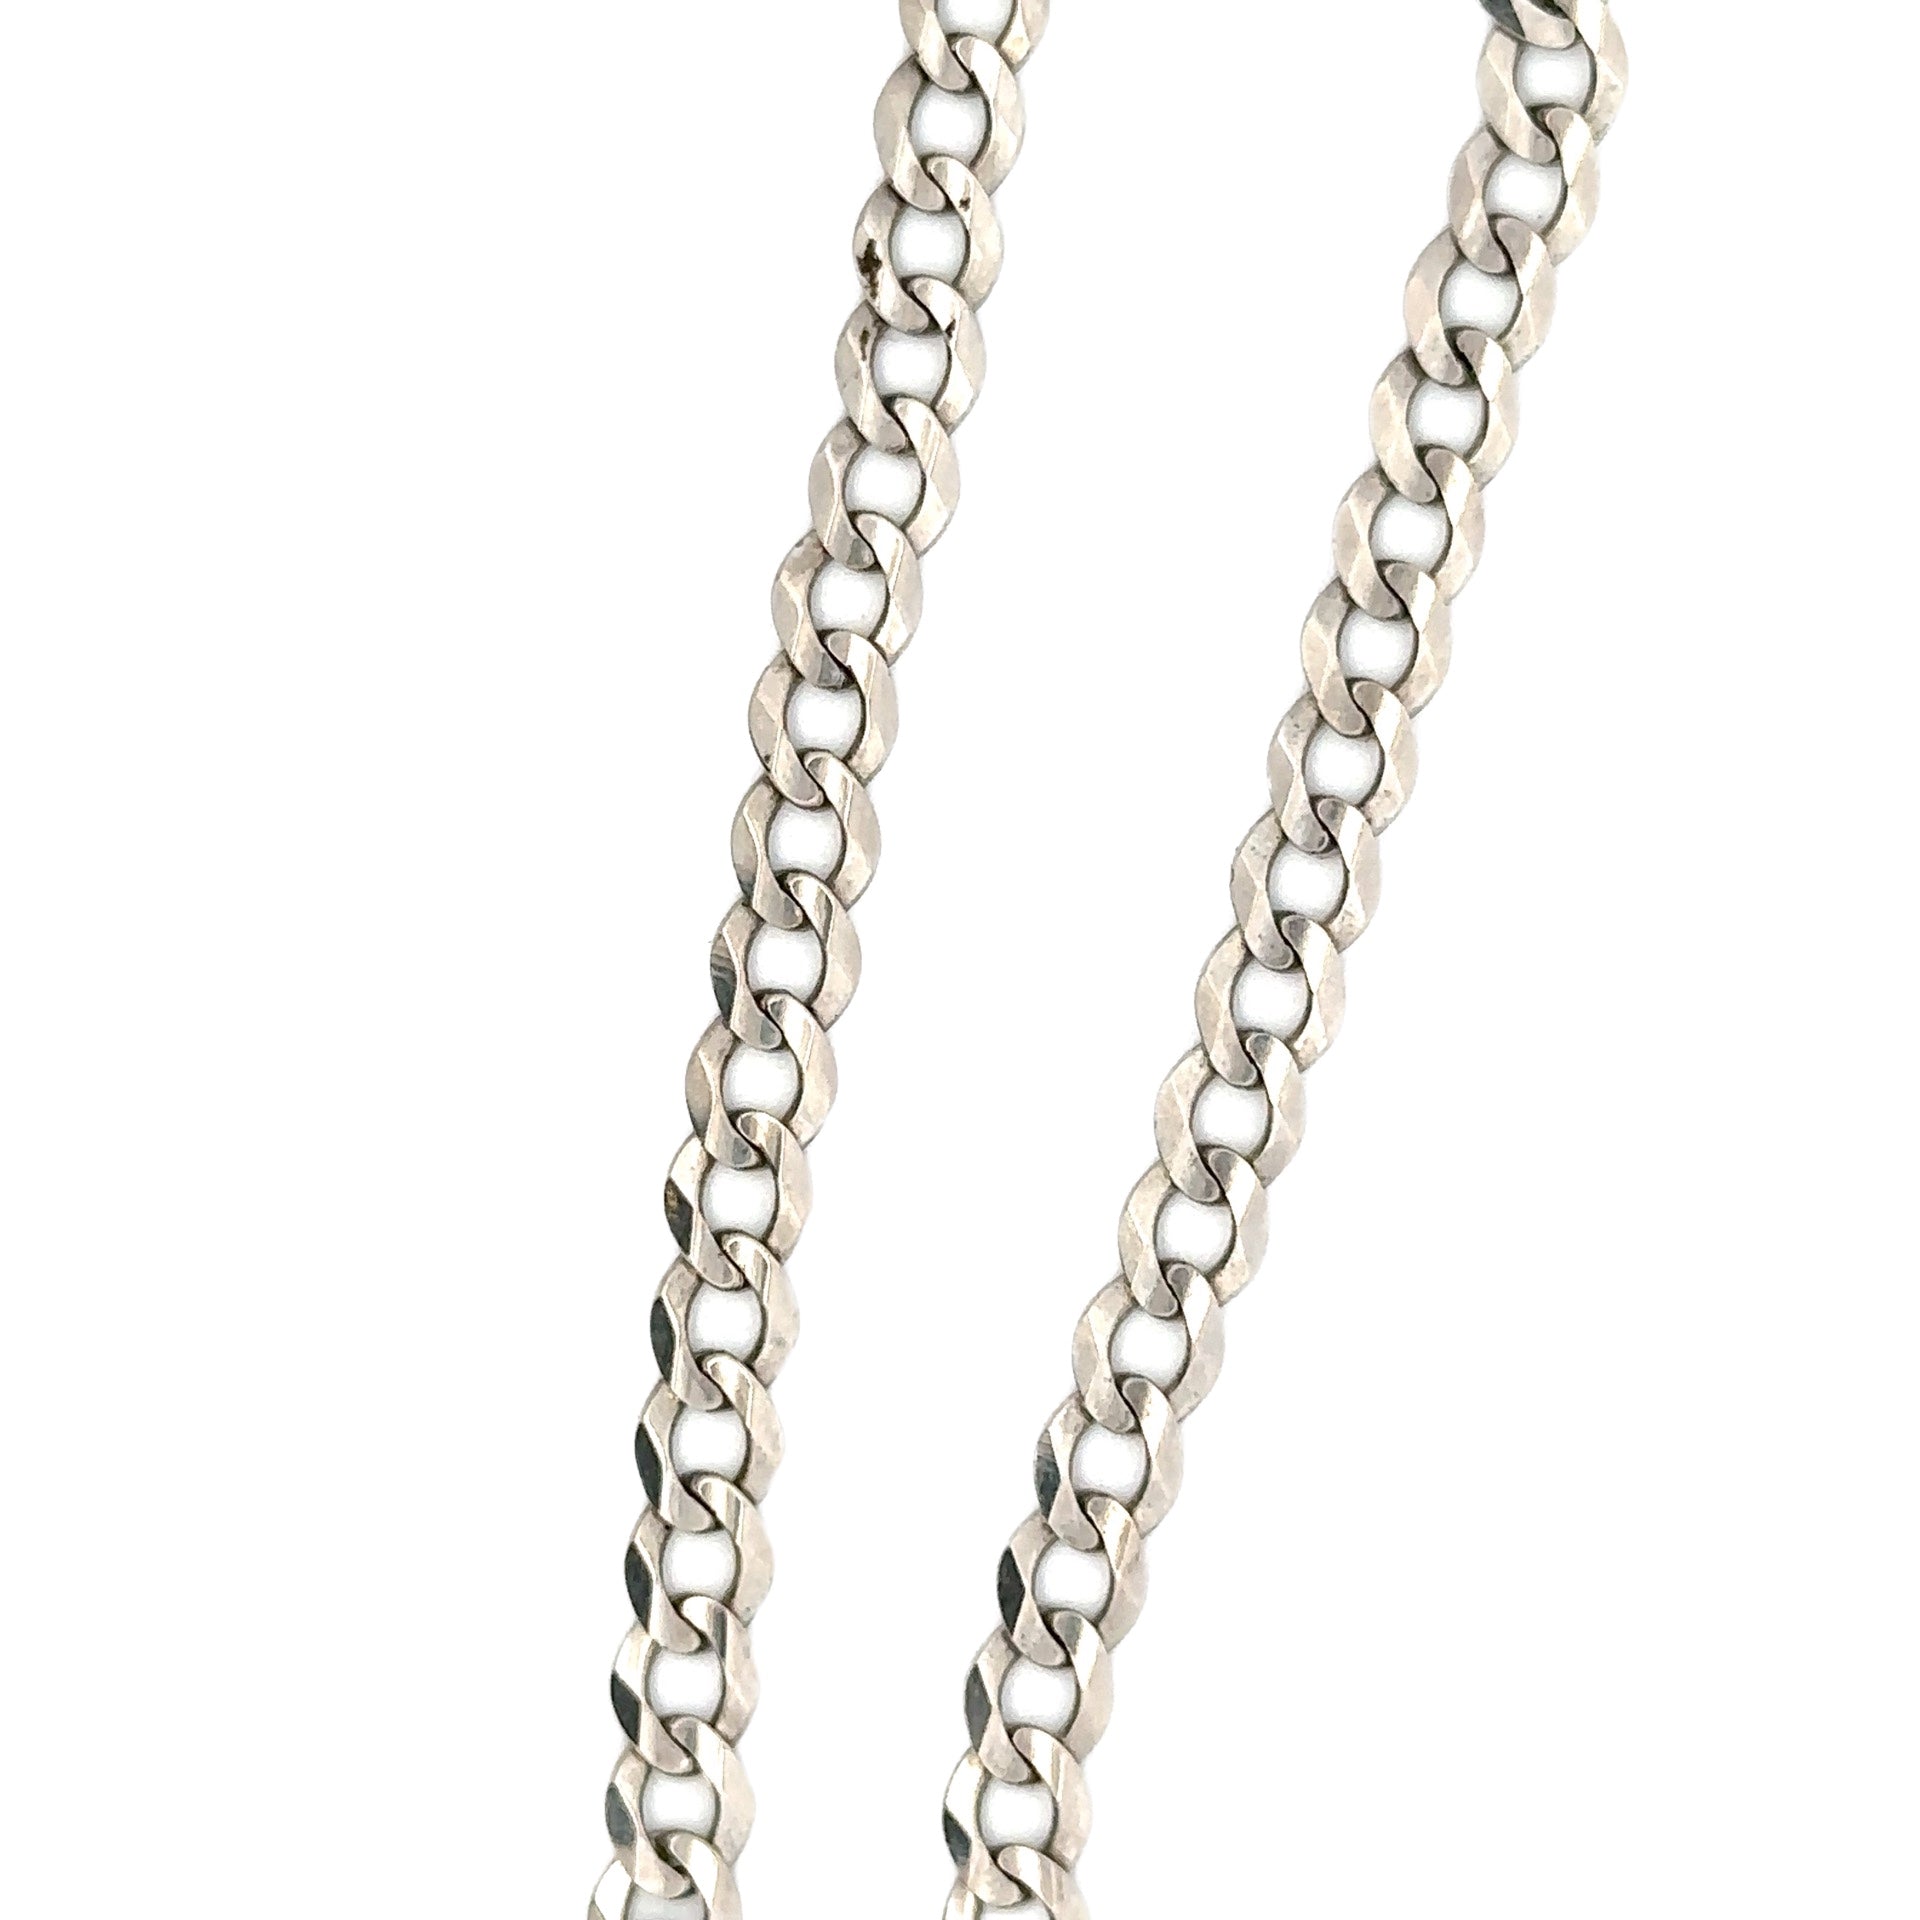 Close up 14K White Gold Link Chain